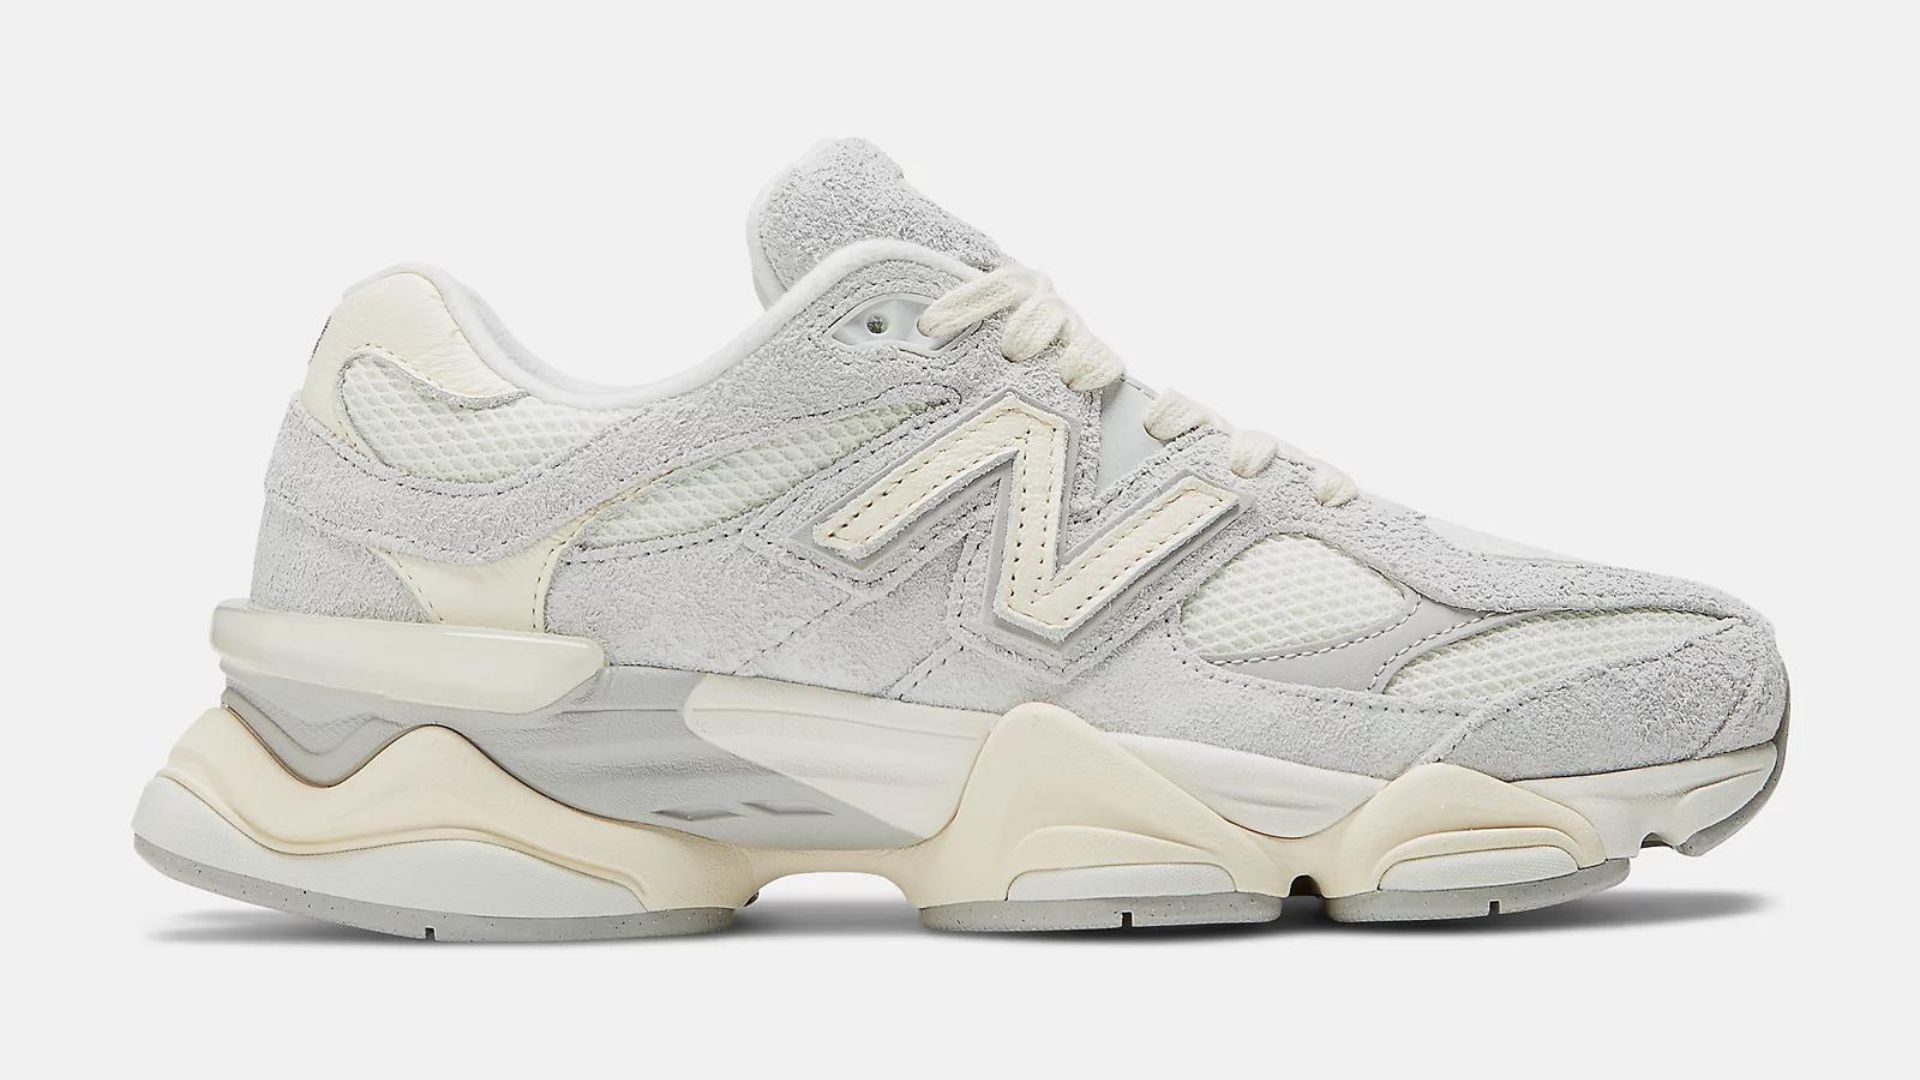 10 iconic New Balance sneakers that live up to the hype